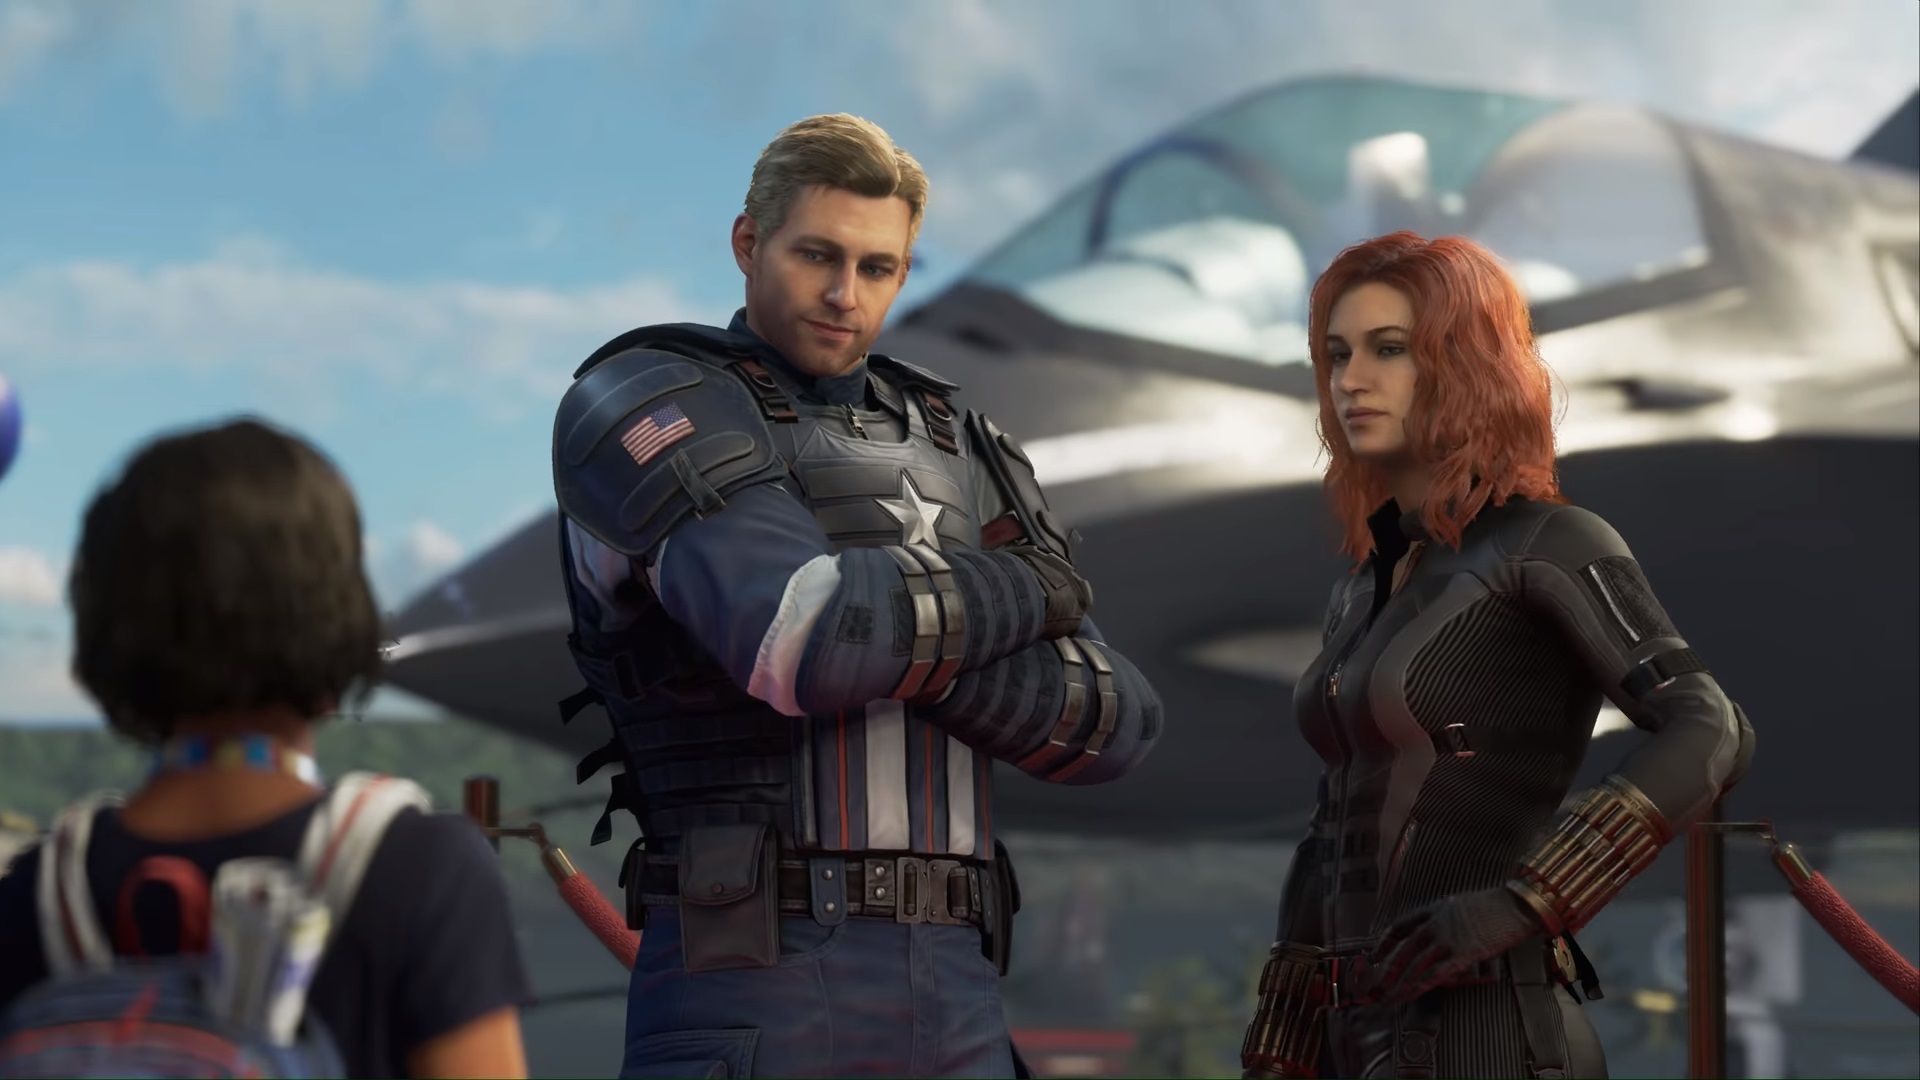 Captain America Avengers PS4 Game Marvel Square Enix Crystal Dynamics Black Widow 